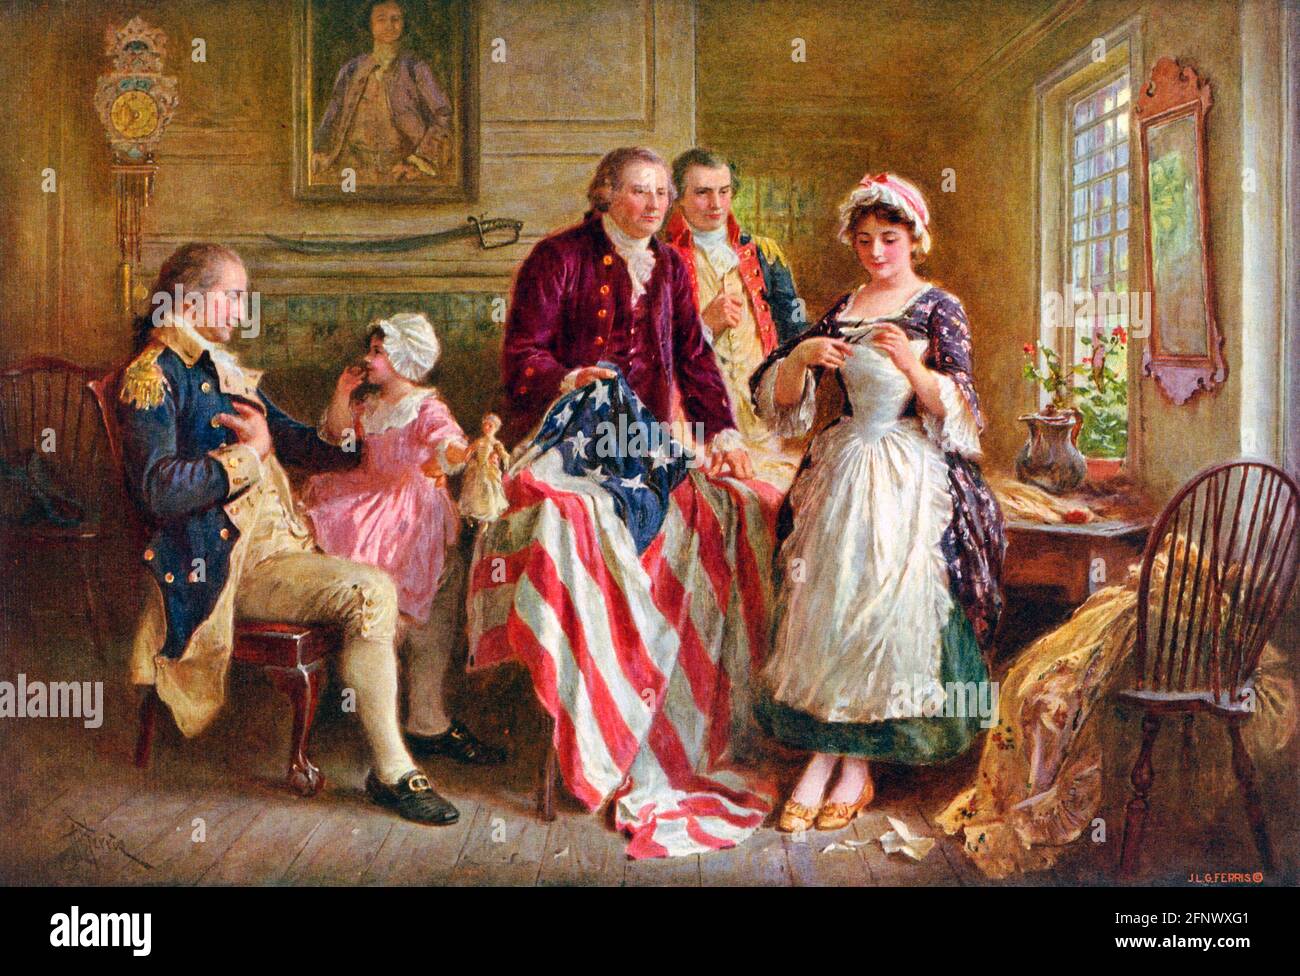 Betsy Ross Flag. Betsy Ross showing Major Ross and Robert Morris how she cut the stars for the American flag; George Washington sits in a chair on the left. Photomechanical print, 1932 Stock Photo